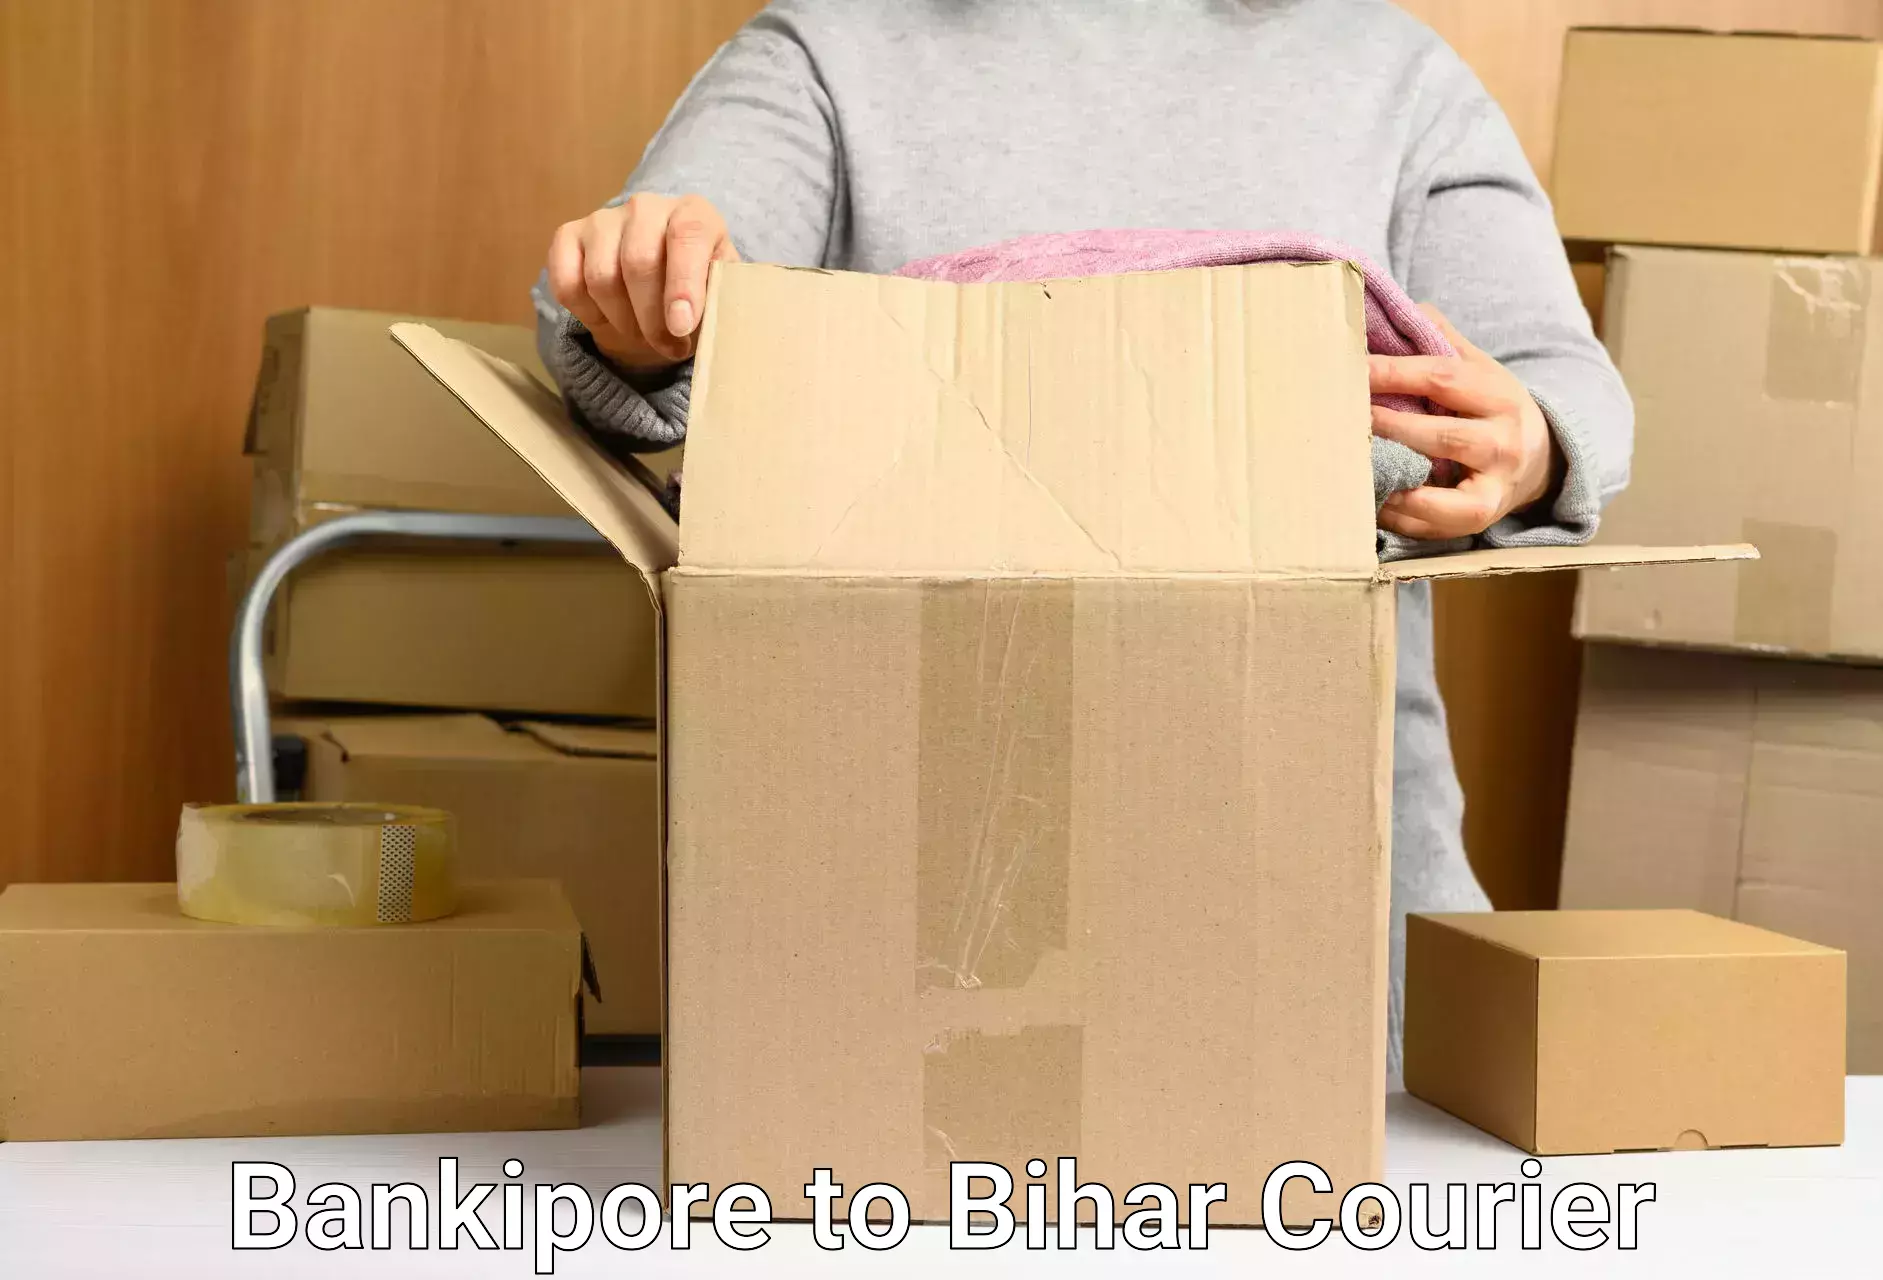 Efficient courier operations Bankipore to Jagdishpur Bhojpur